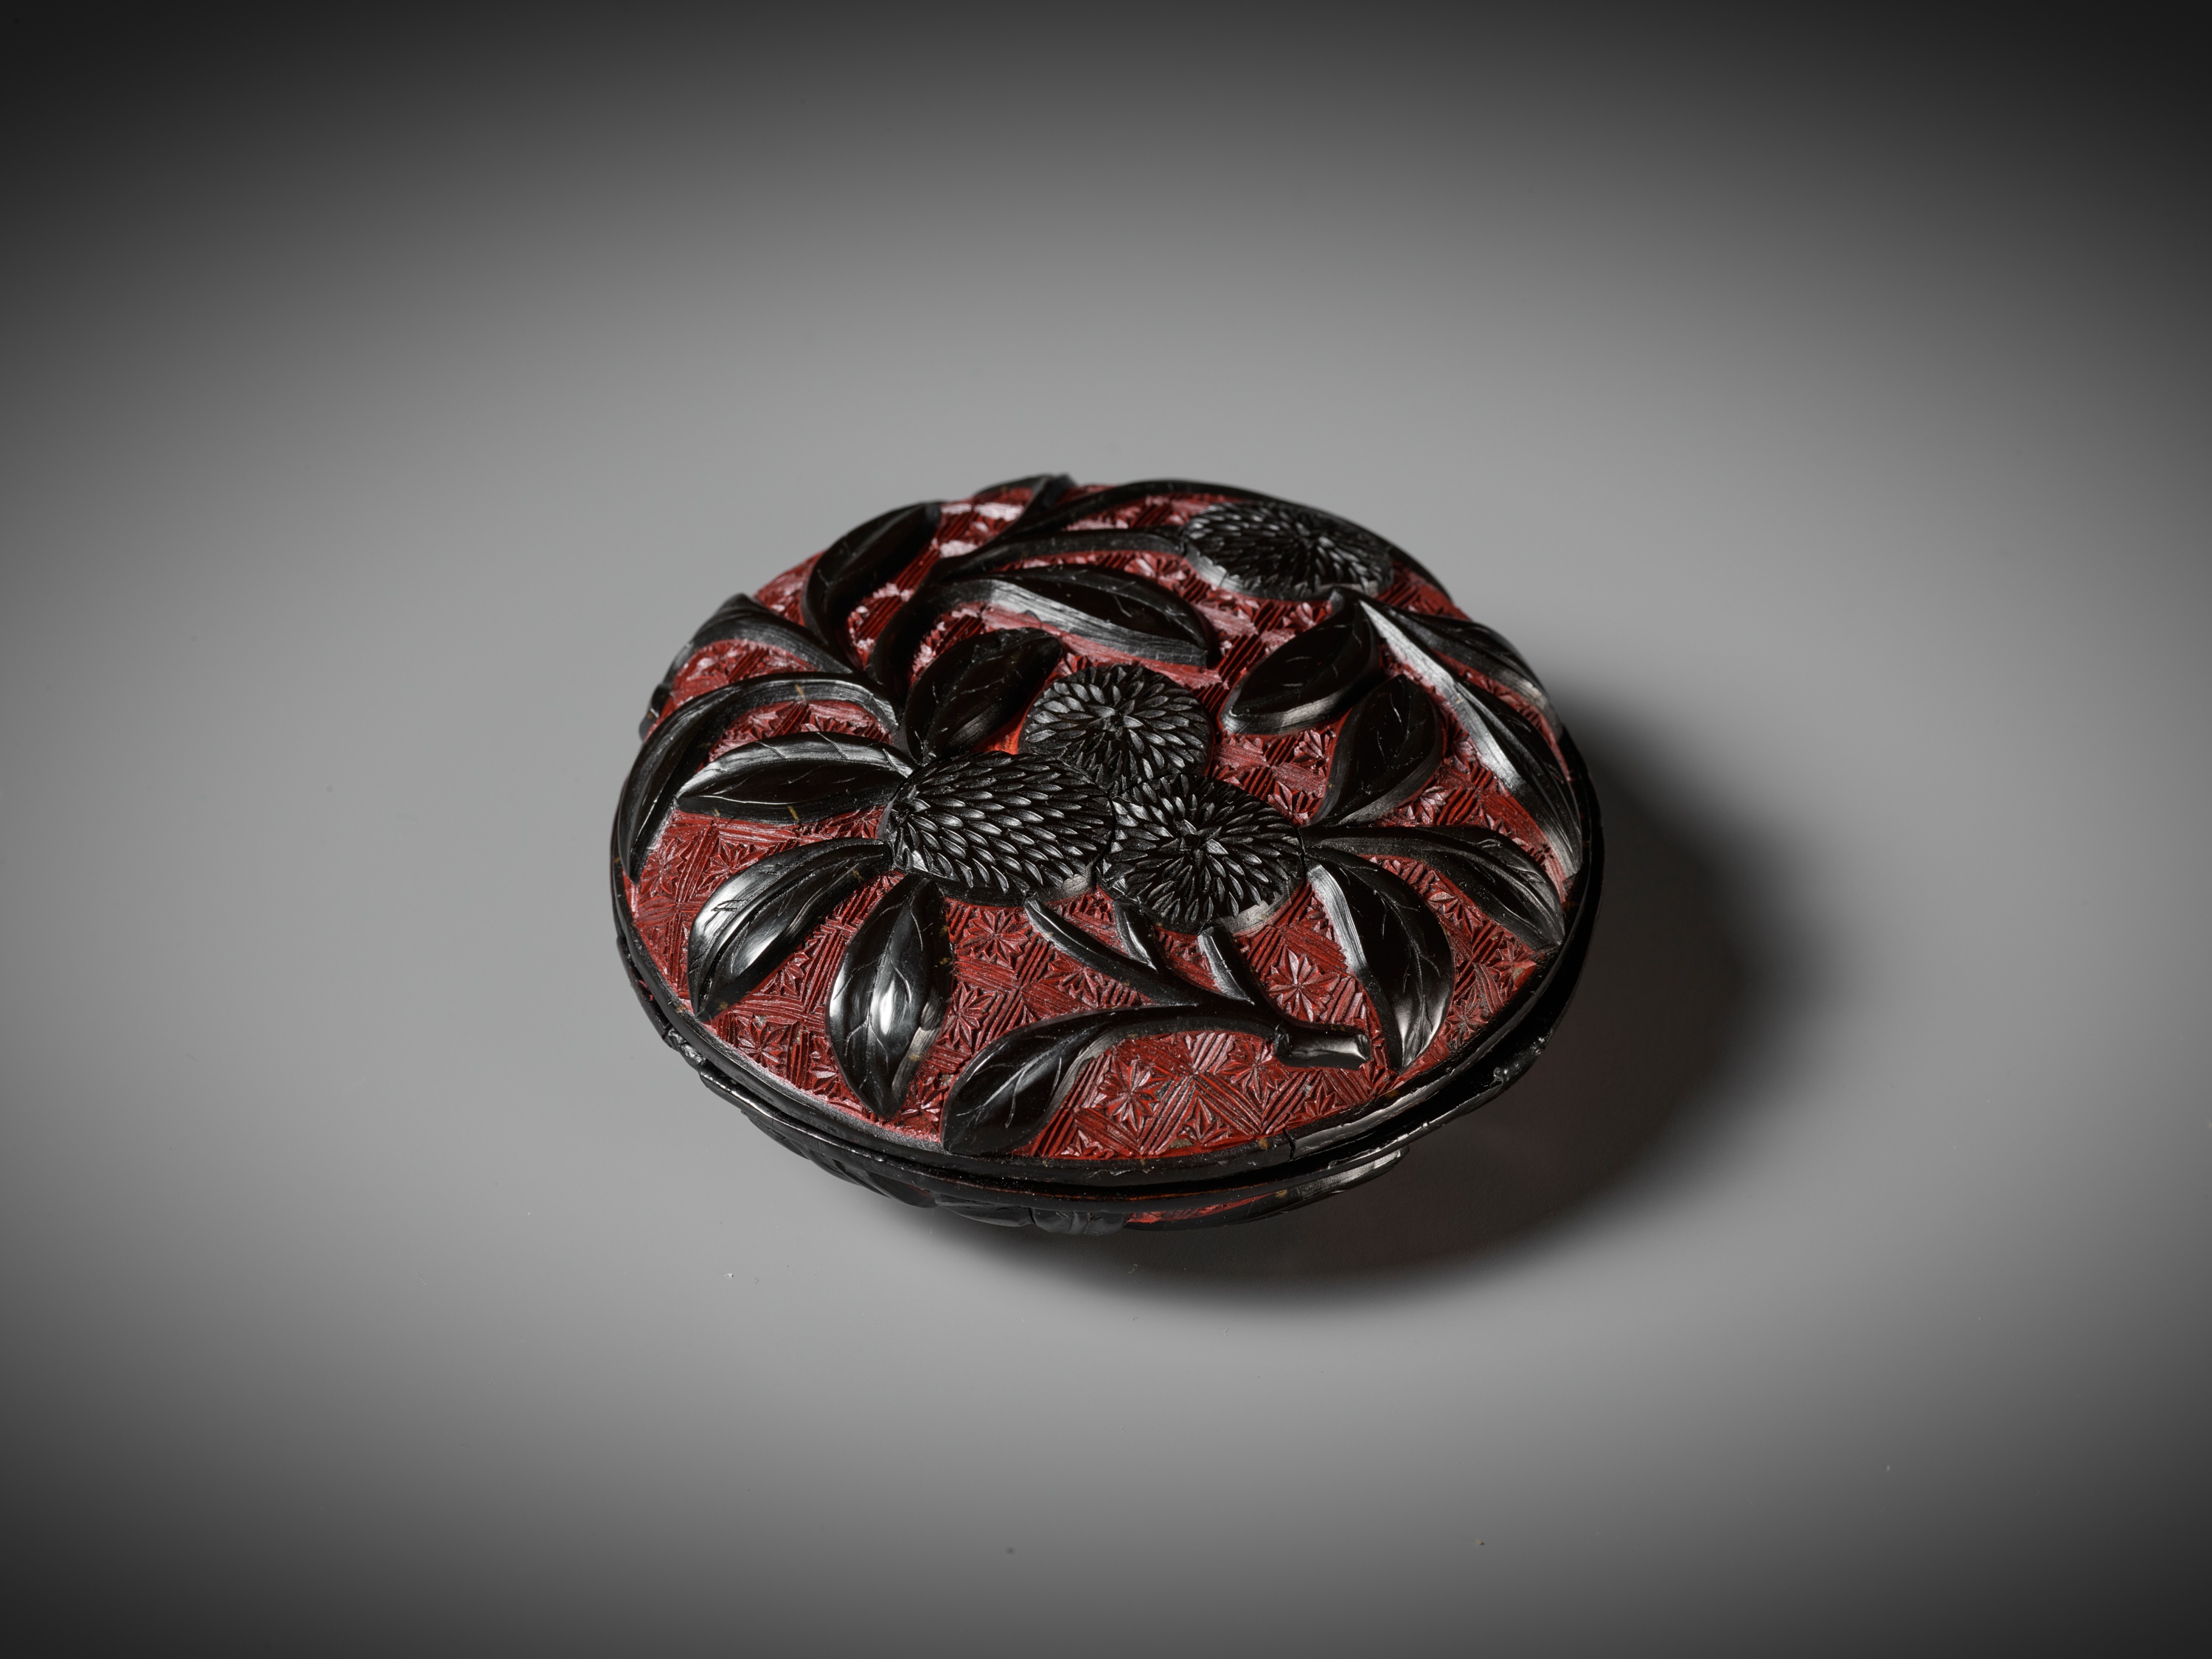 A PAIR OF RED AND BLACK LACQUER 'LYCHEE' BOXES AND COVERS, MING DYNASTY - Image 10 of 11